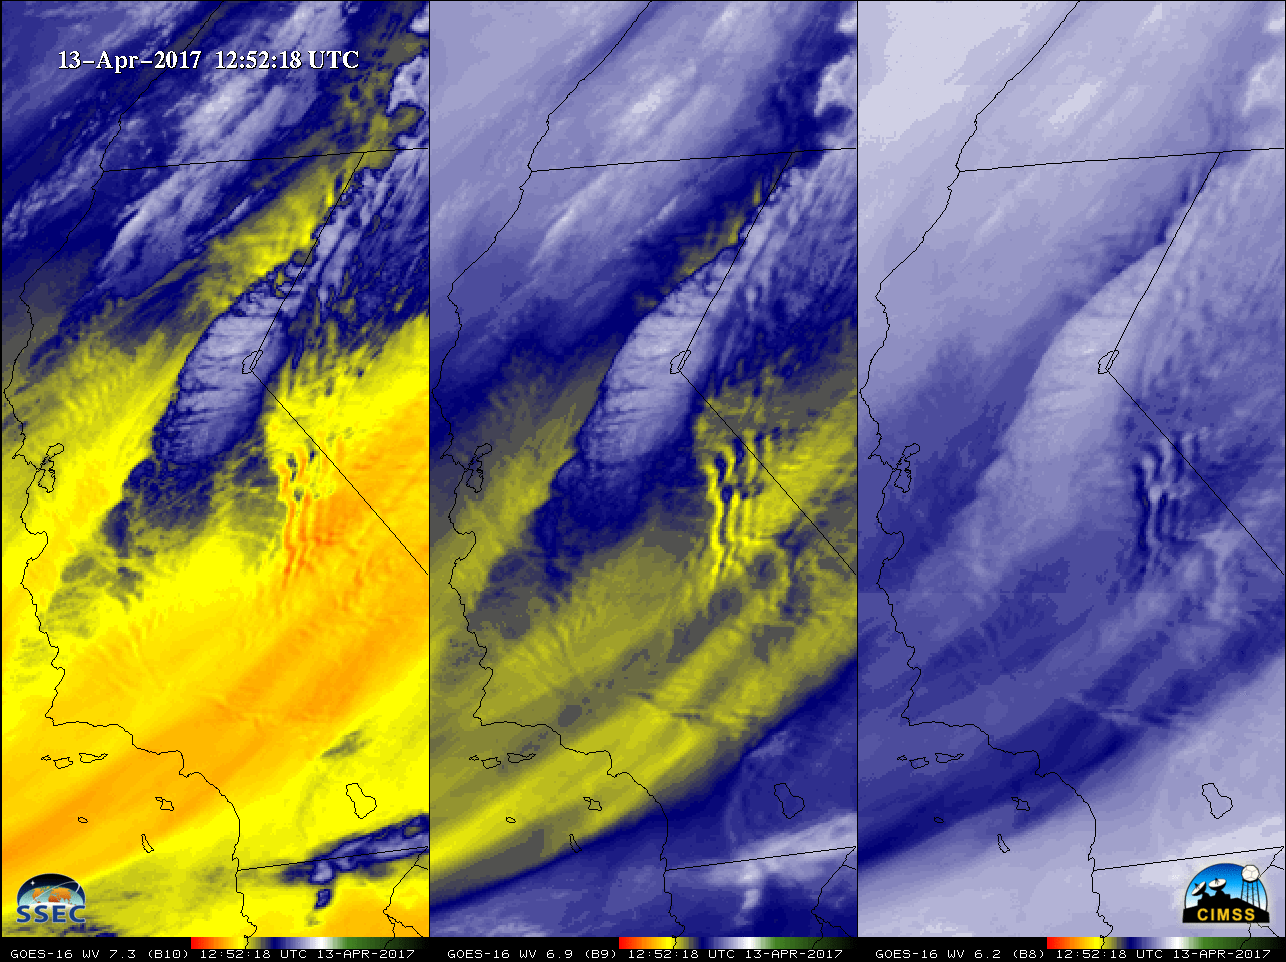 GOES-16 7.3 µm (left), 6.9 µm (center) and 6.2 µm (right) Water Vapor images [click to play animation]